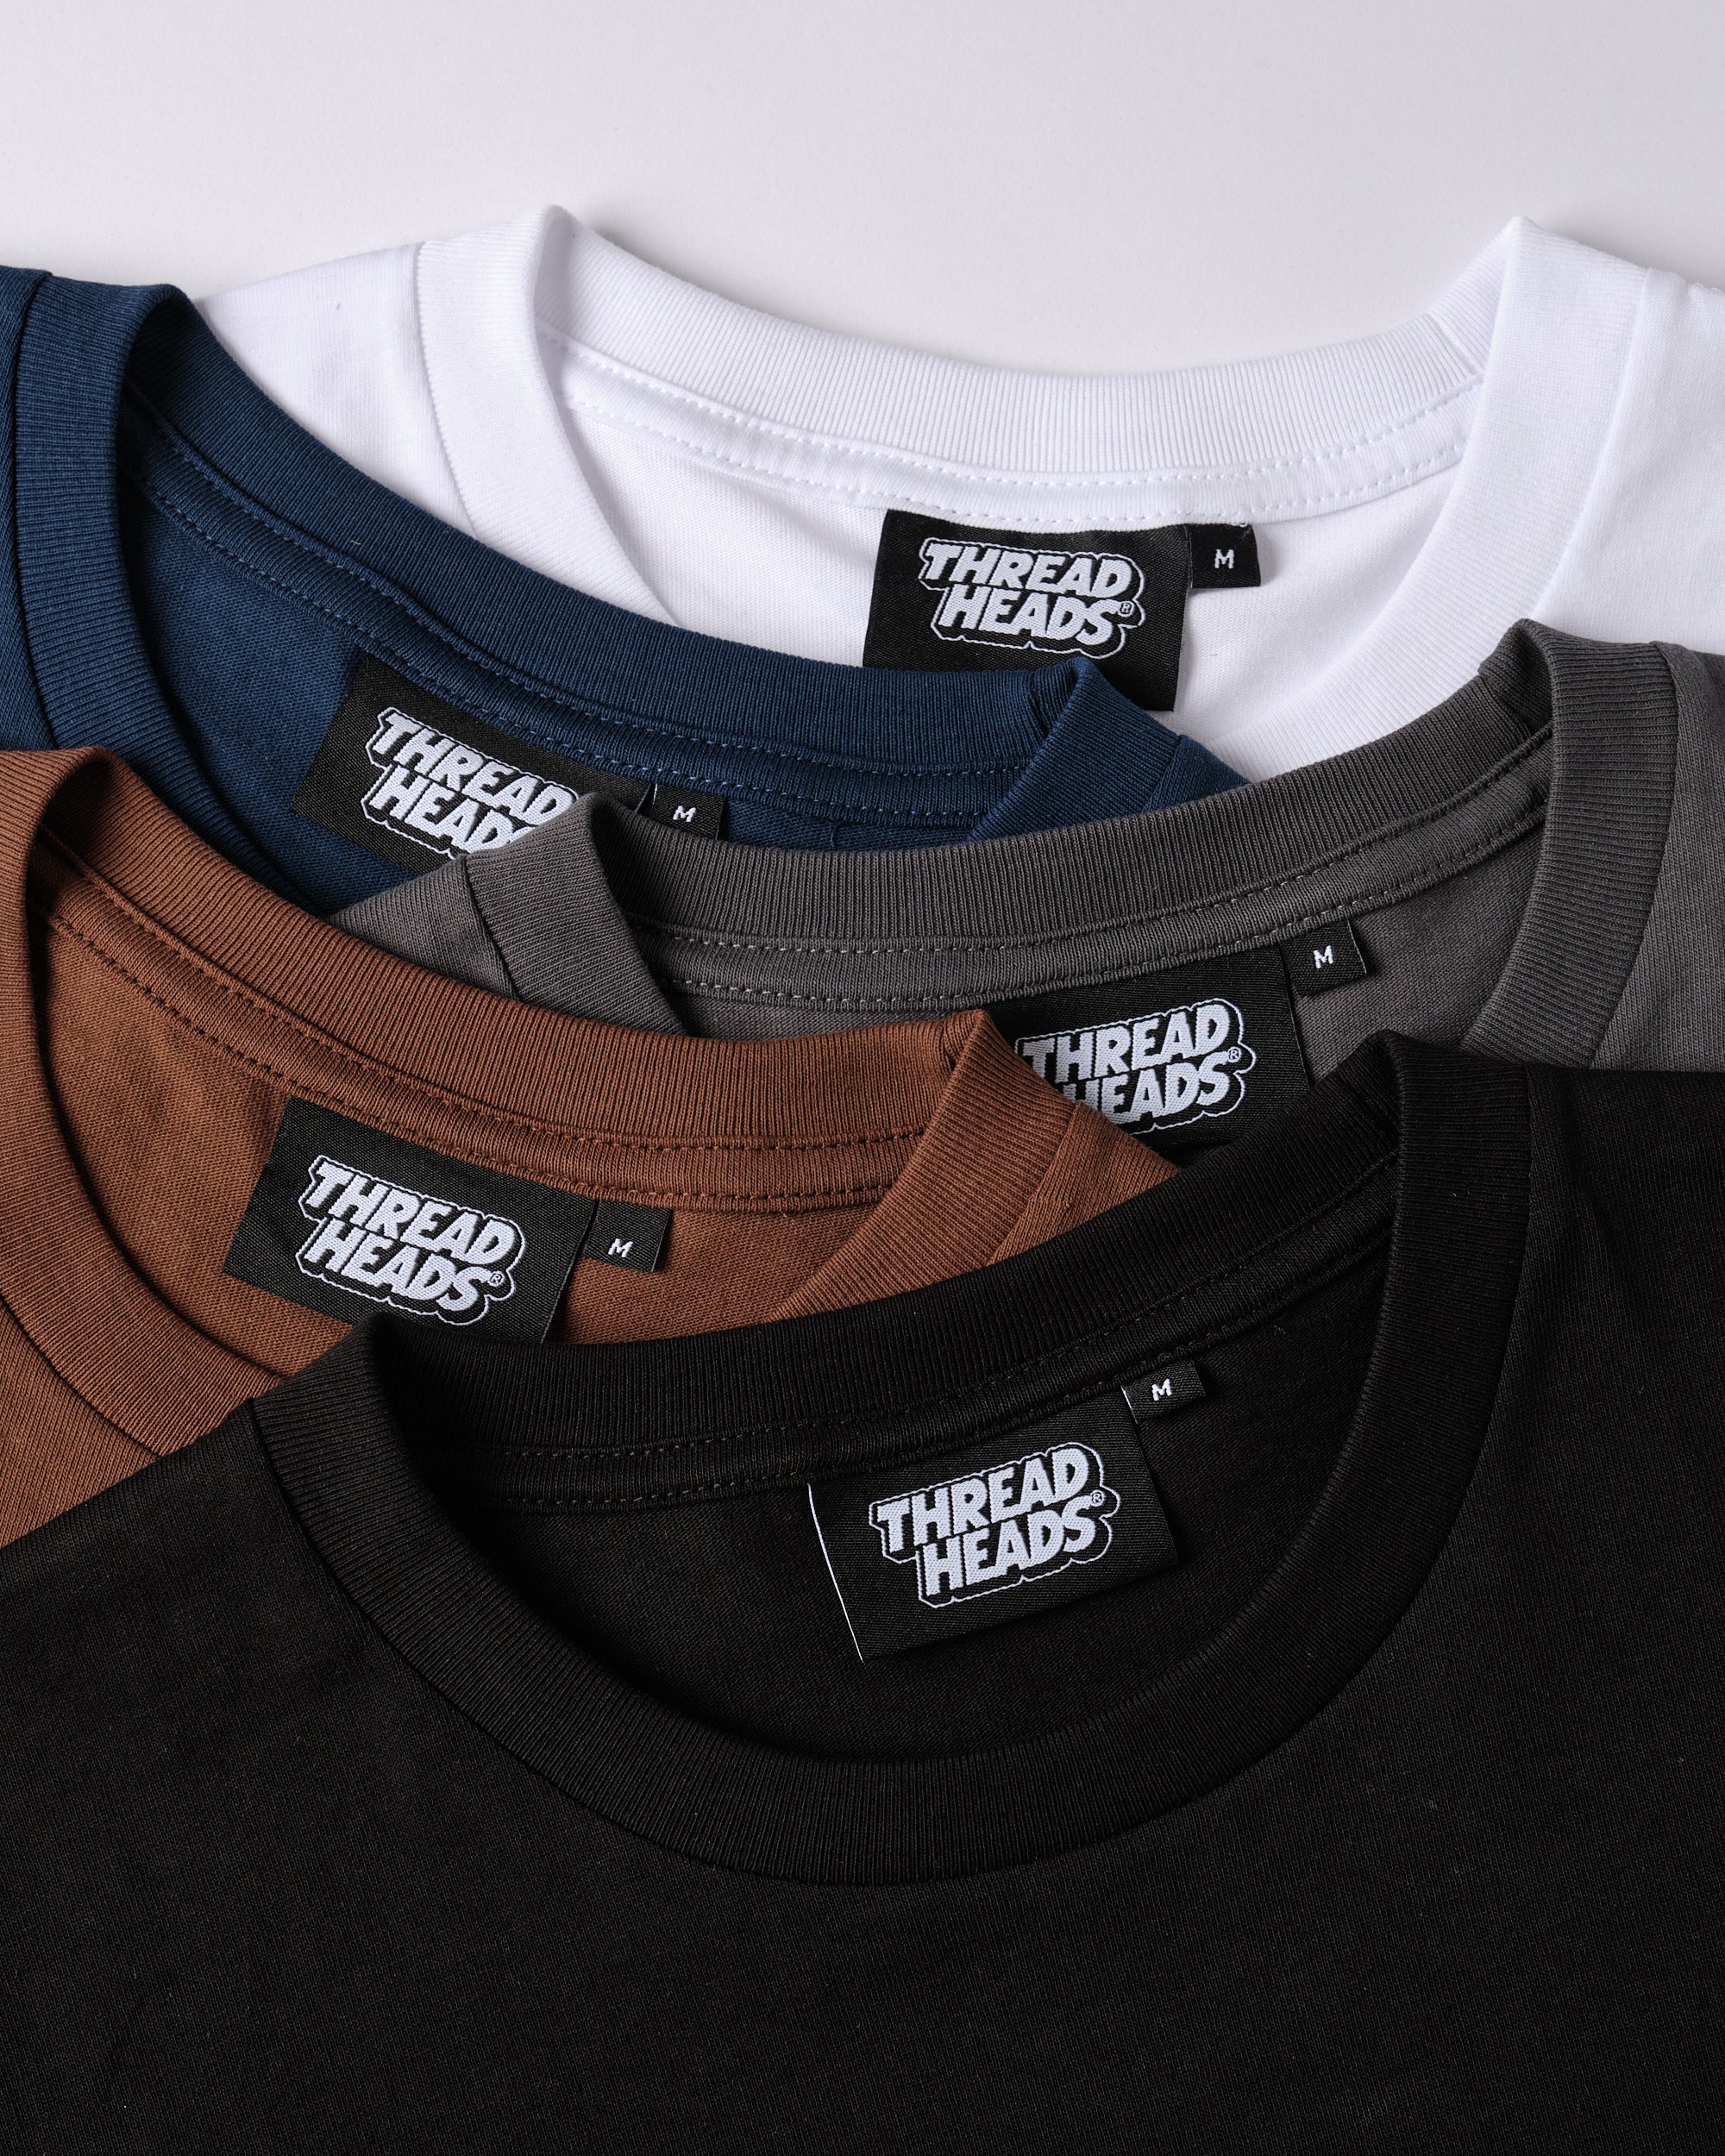 Classic Tee 5-Pack: Black, Brown, Charcoal, Navy, White